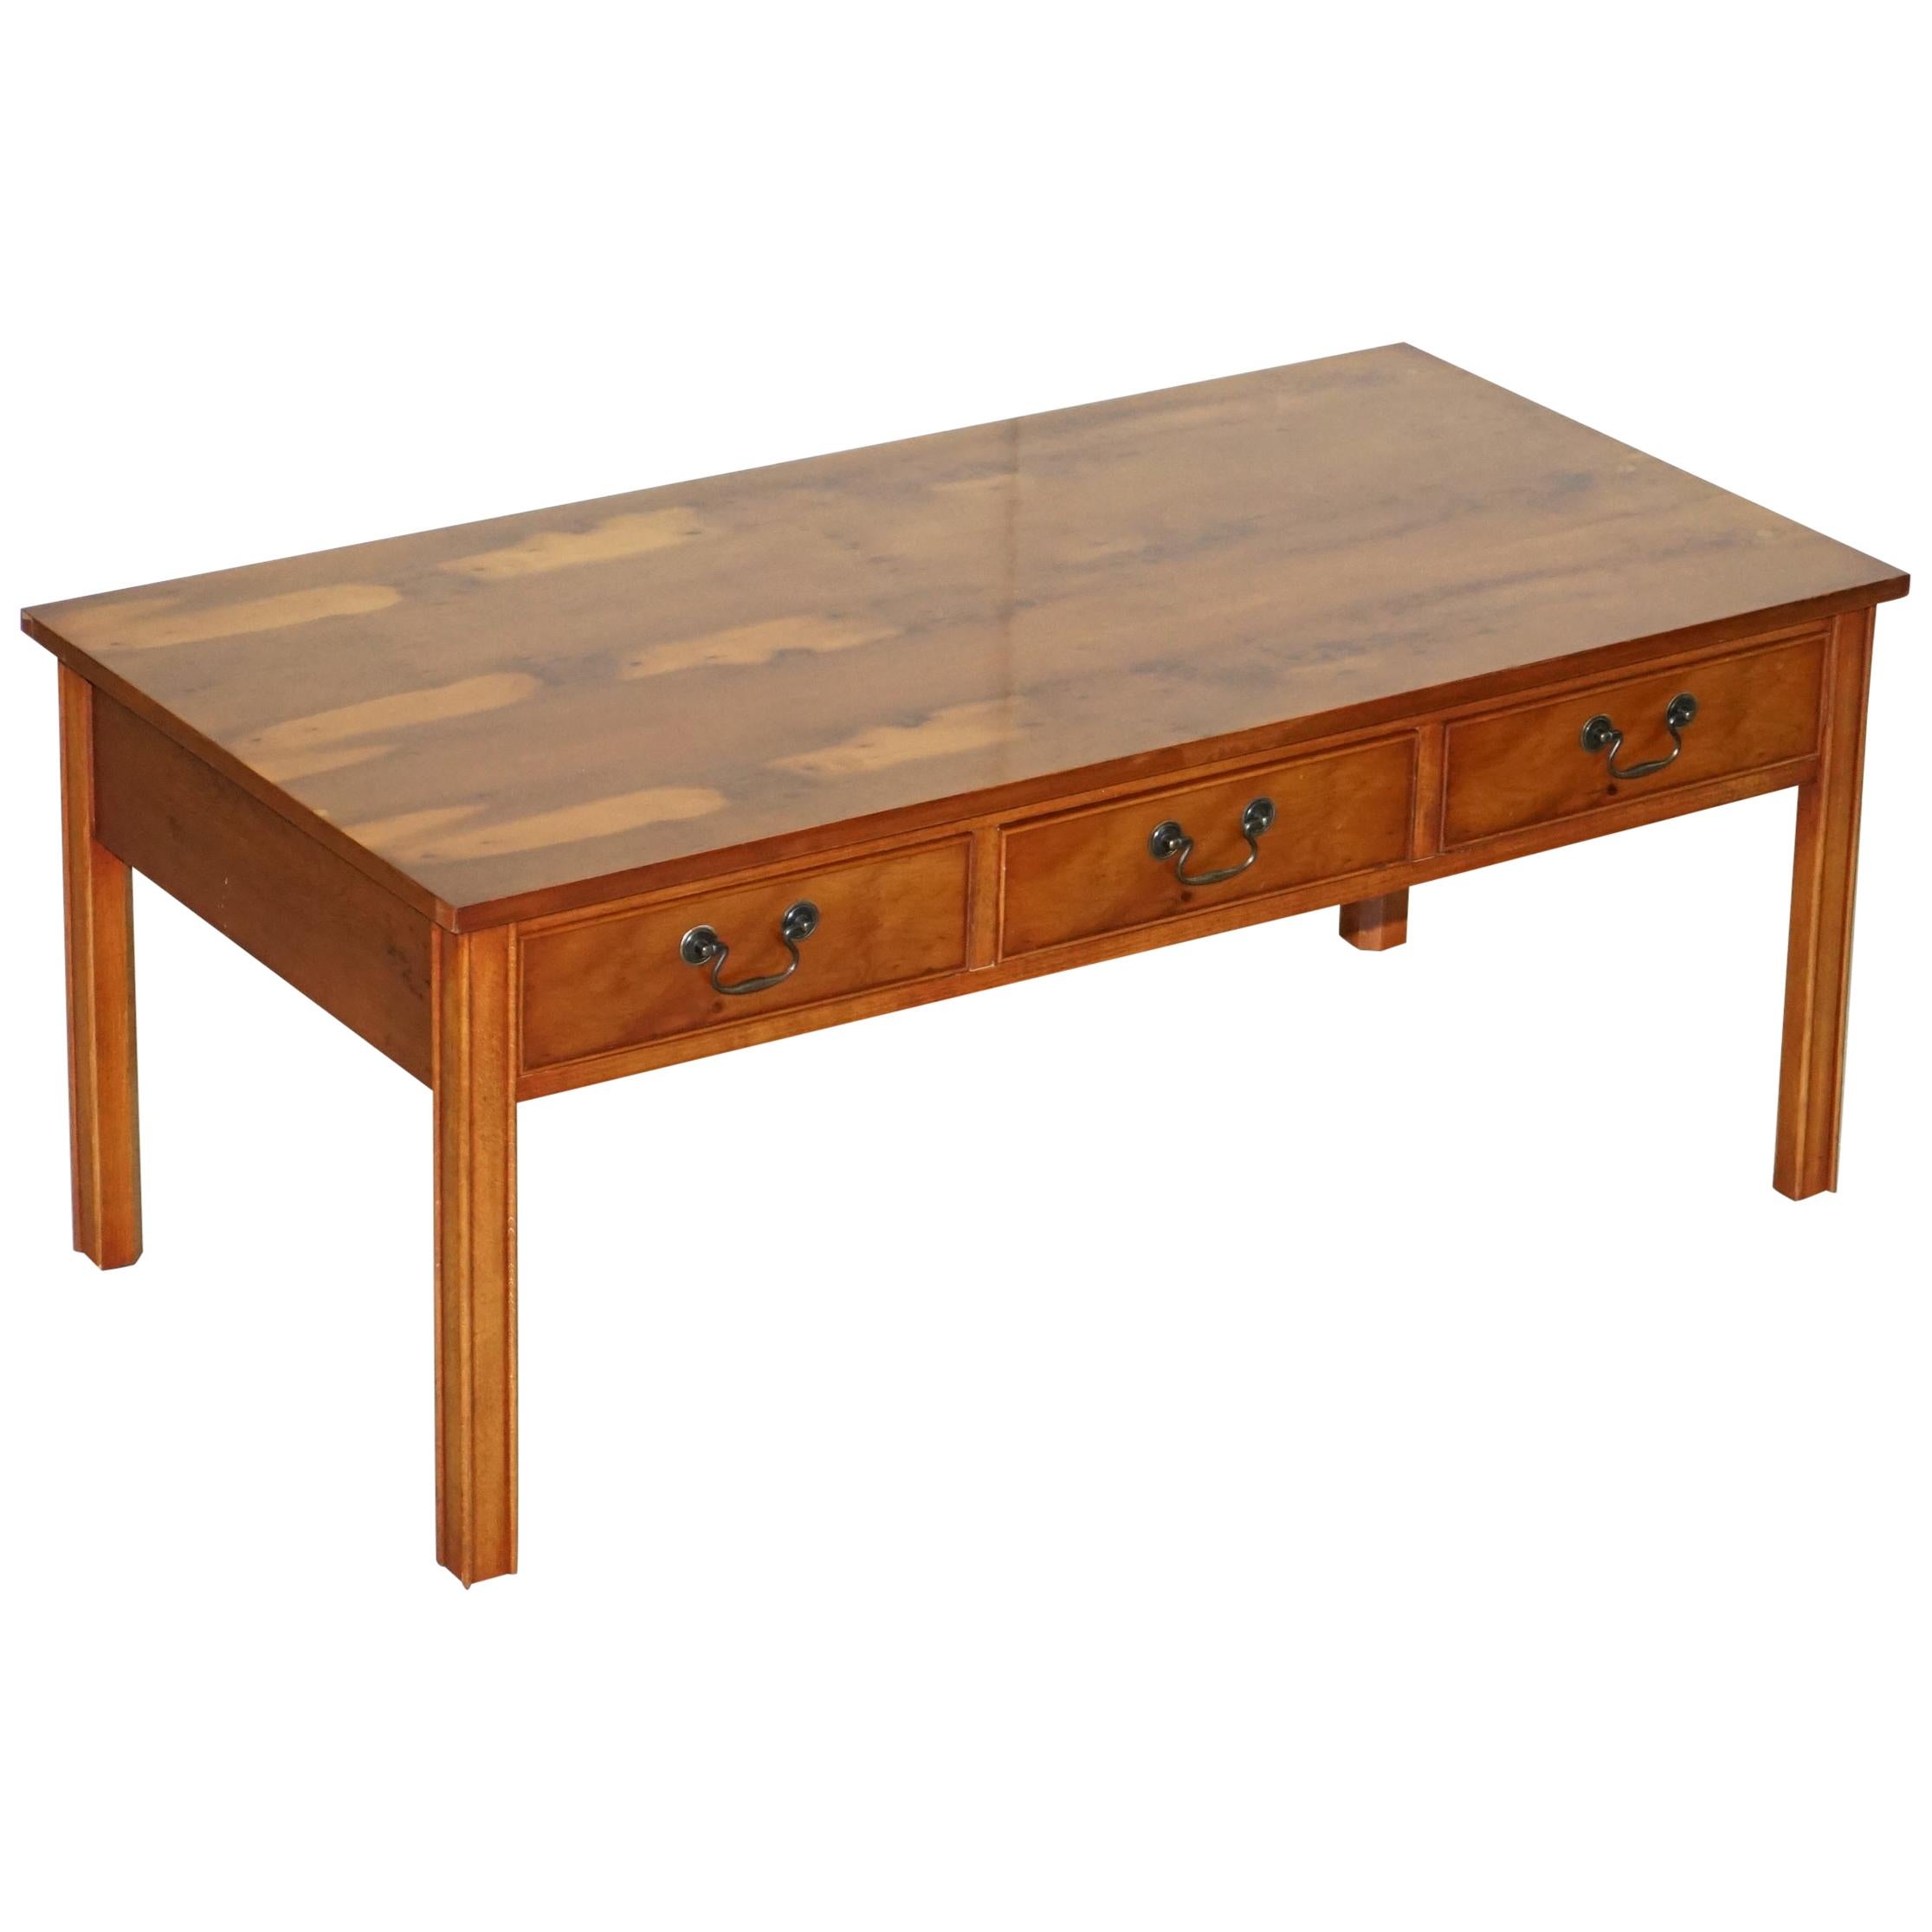 Lovely Harrods London Burr Yew Wood Coffee Table Lovely Vintage Detailing For Sale